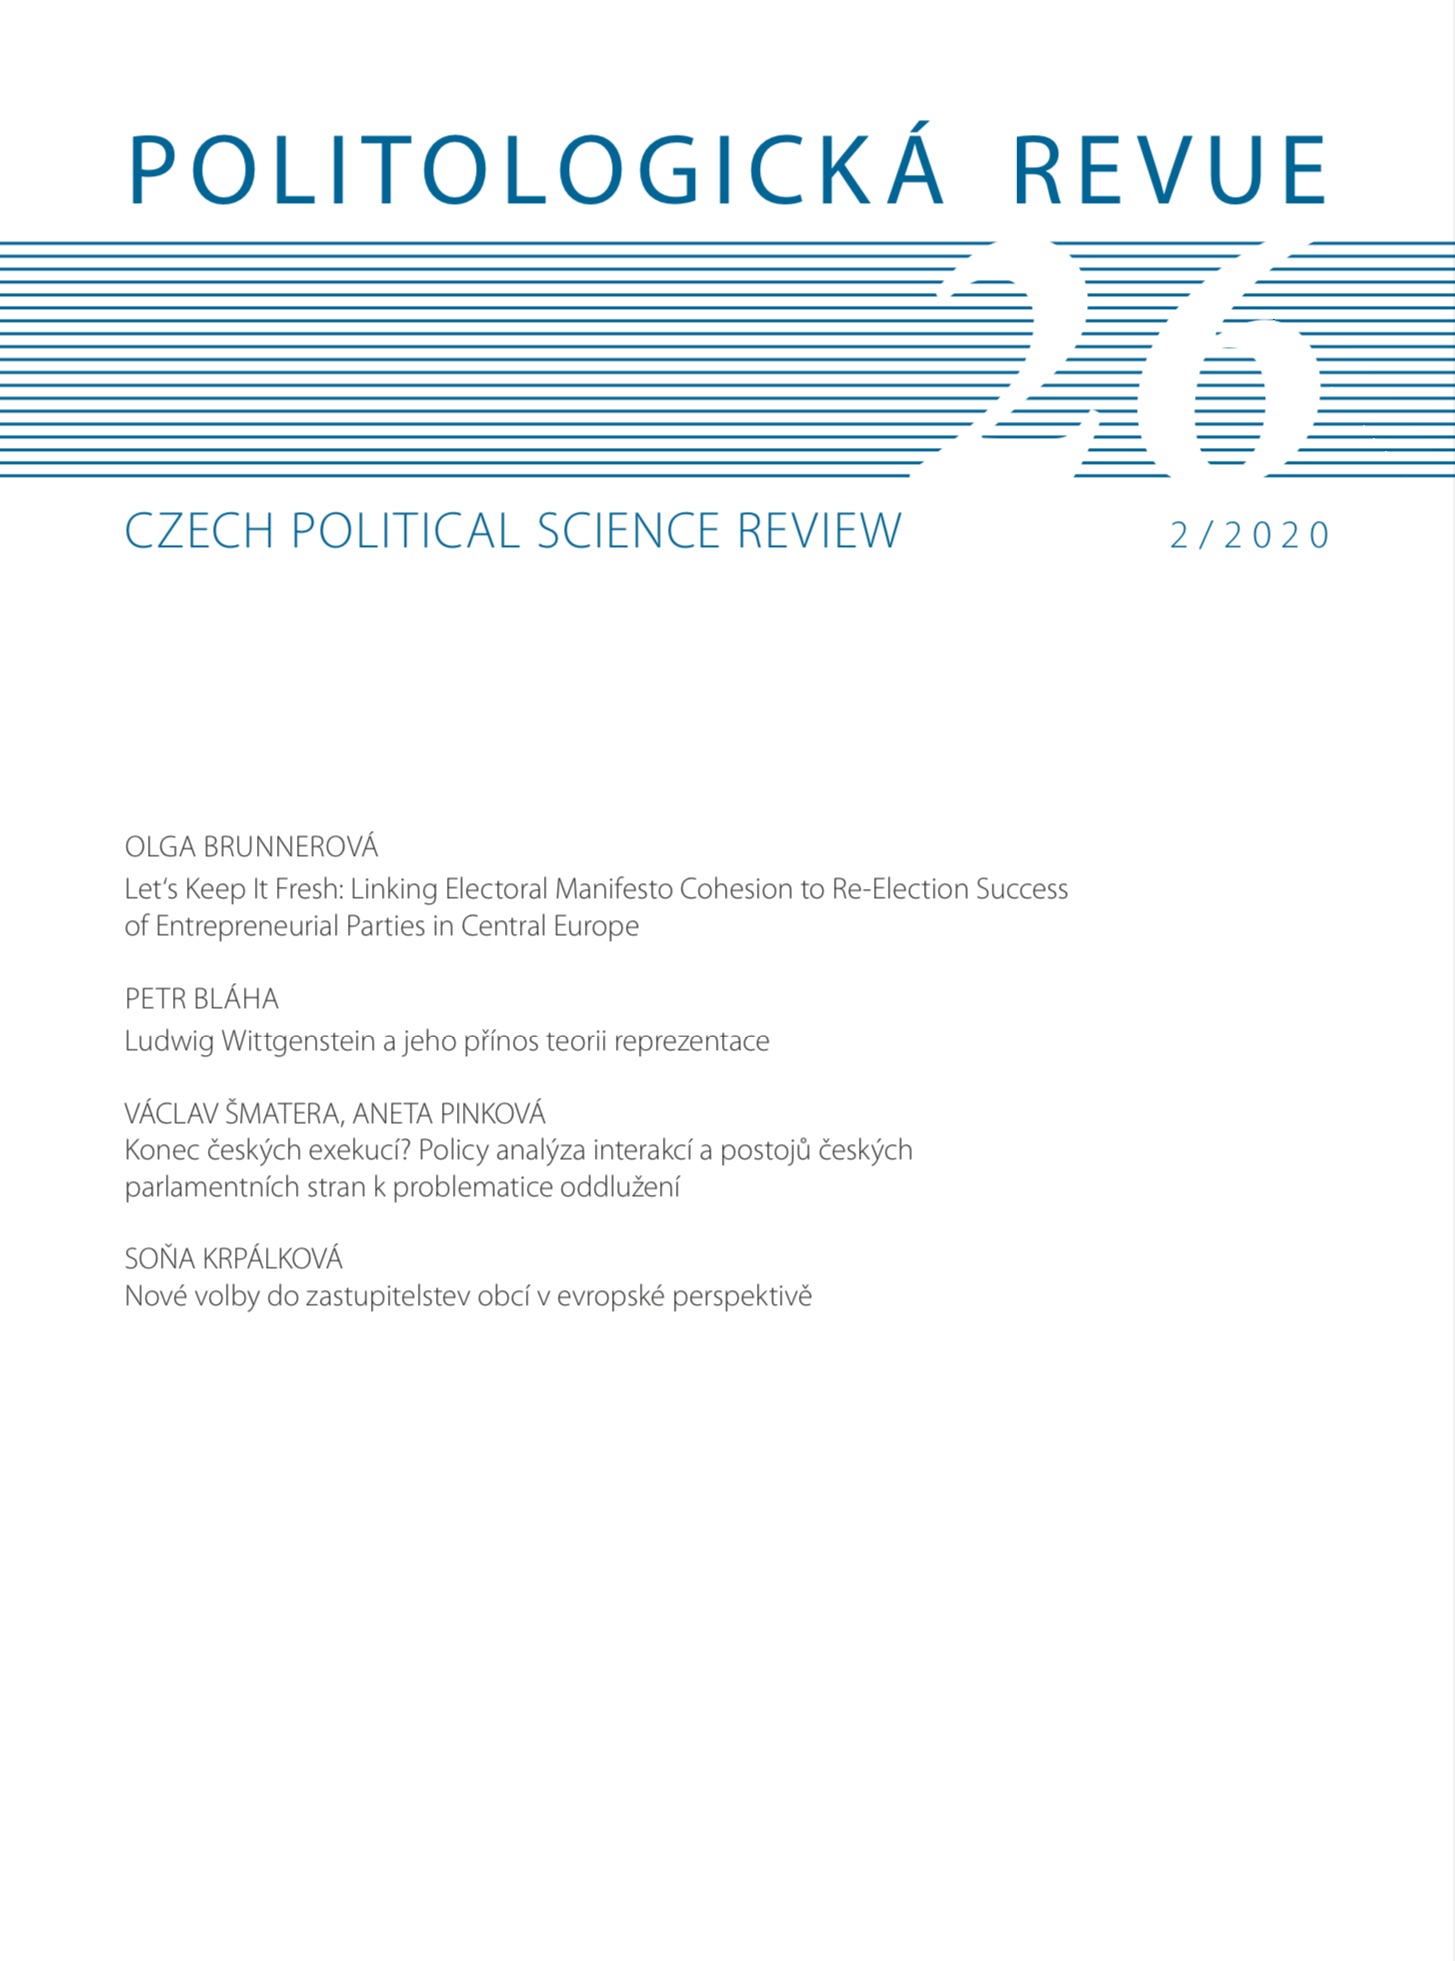 The End of the Czech Way of Insolvency Proceeding? A Policy Analysis of Party Interactions and Attitudes Cover Image